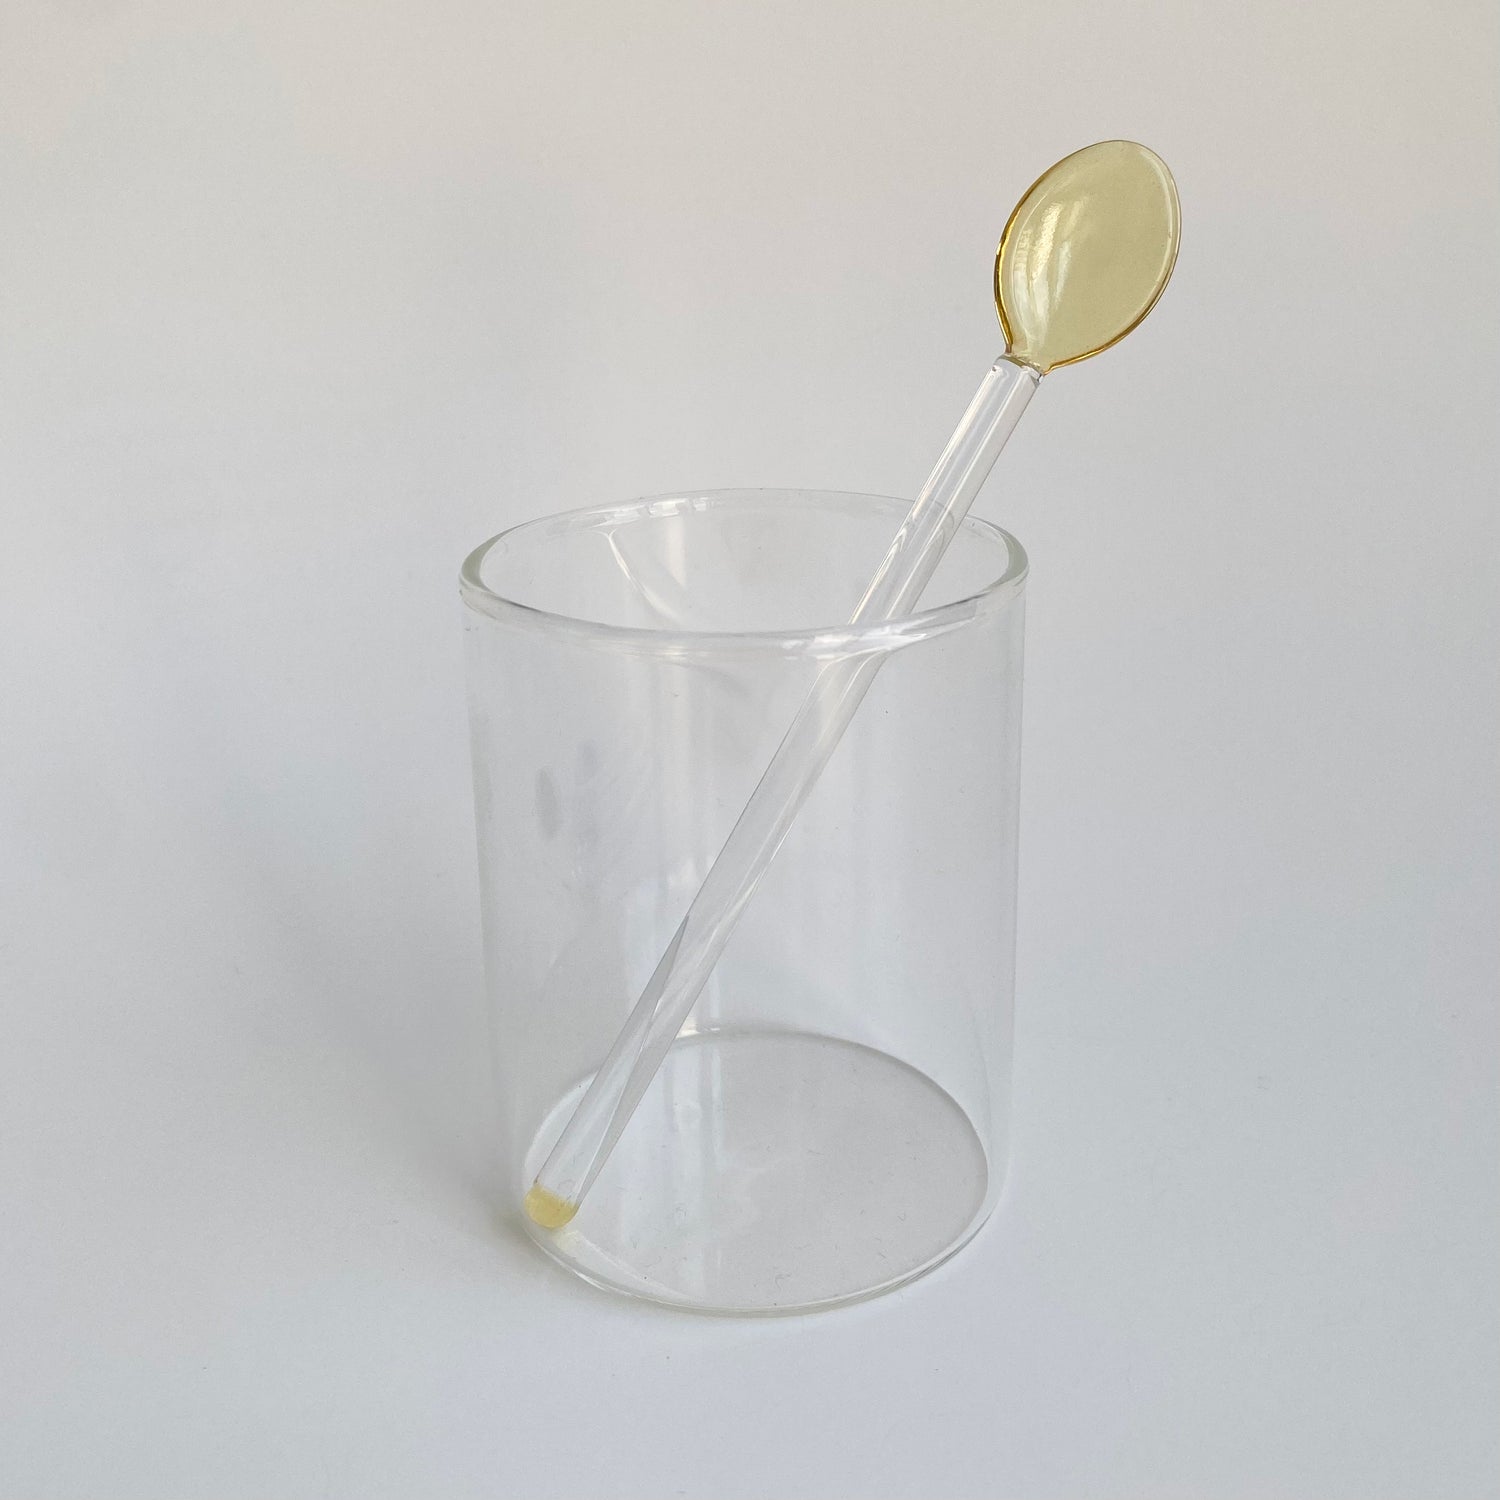 Glass Spoon & Coffee Stirrer in yellow